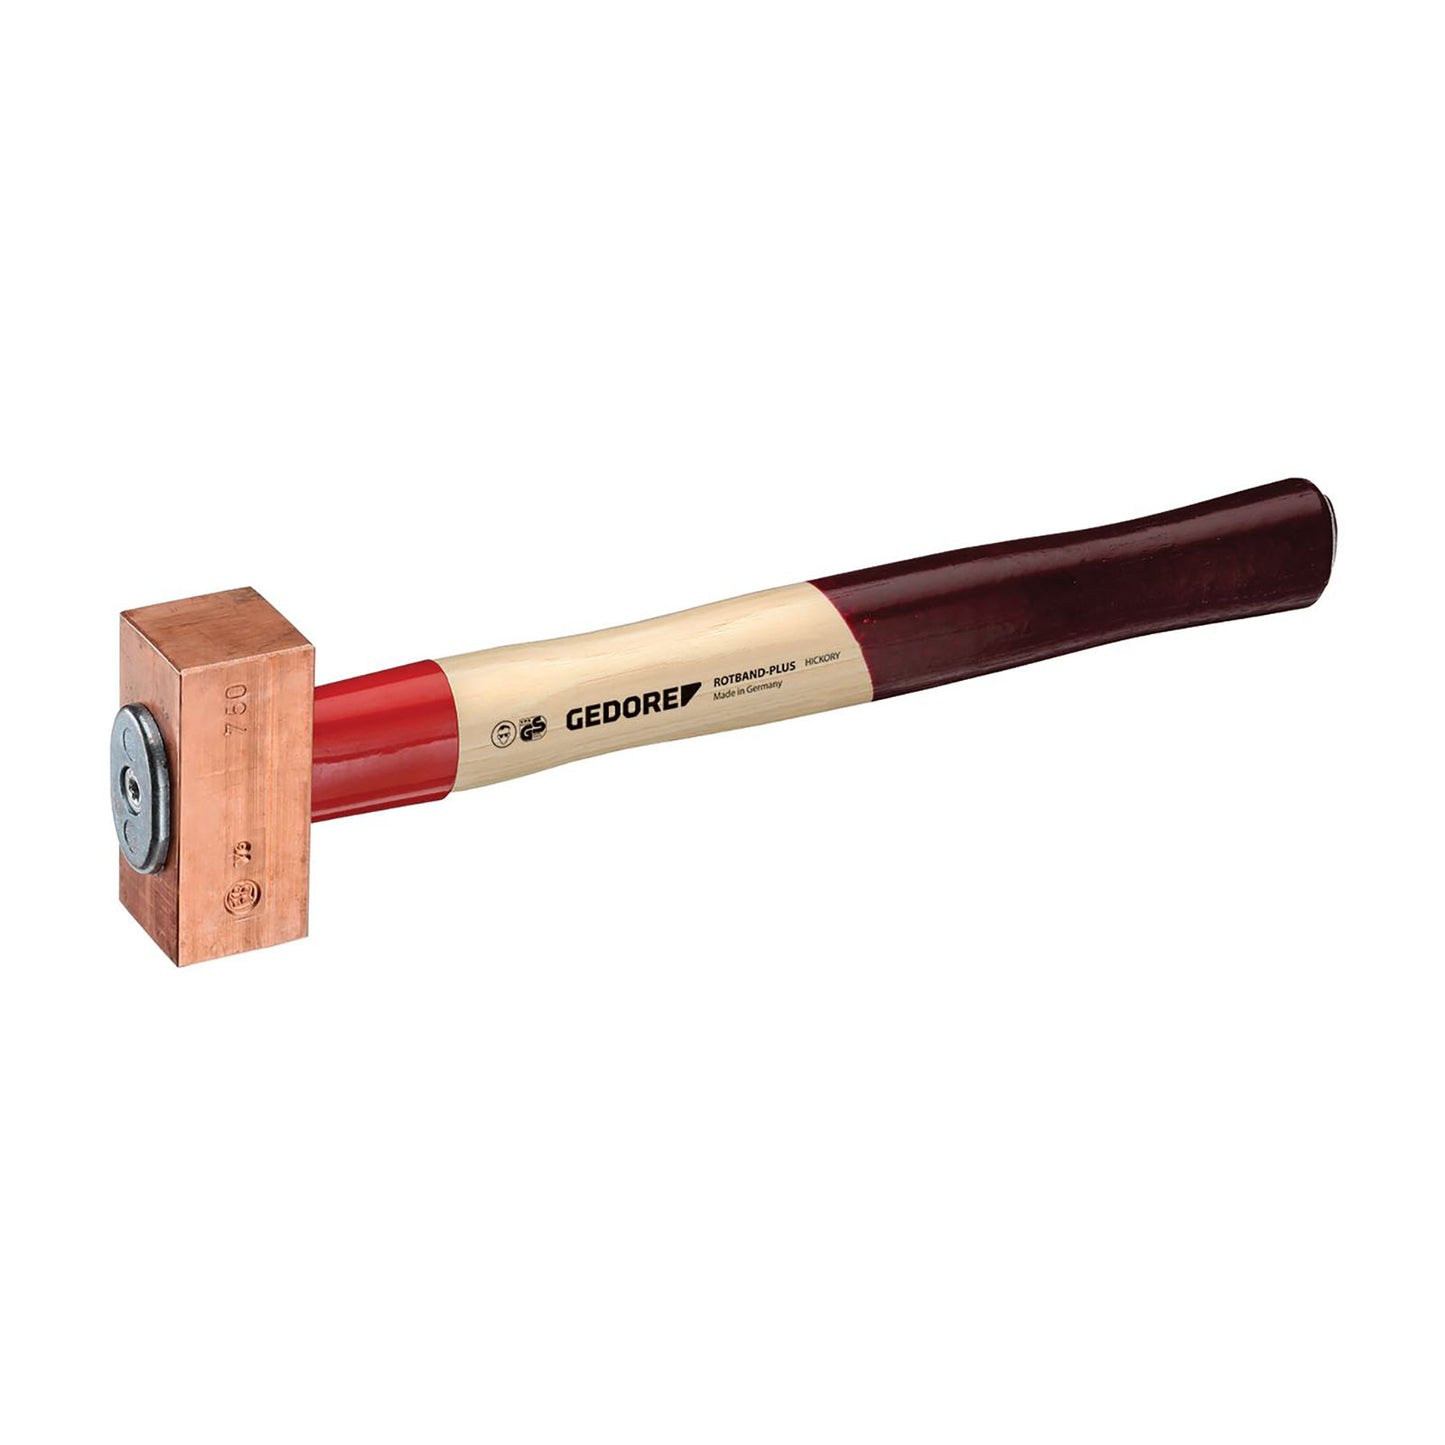 GEDORE 622 H-750 - ROTBAND copper hammer 750g (8672410)